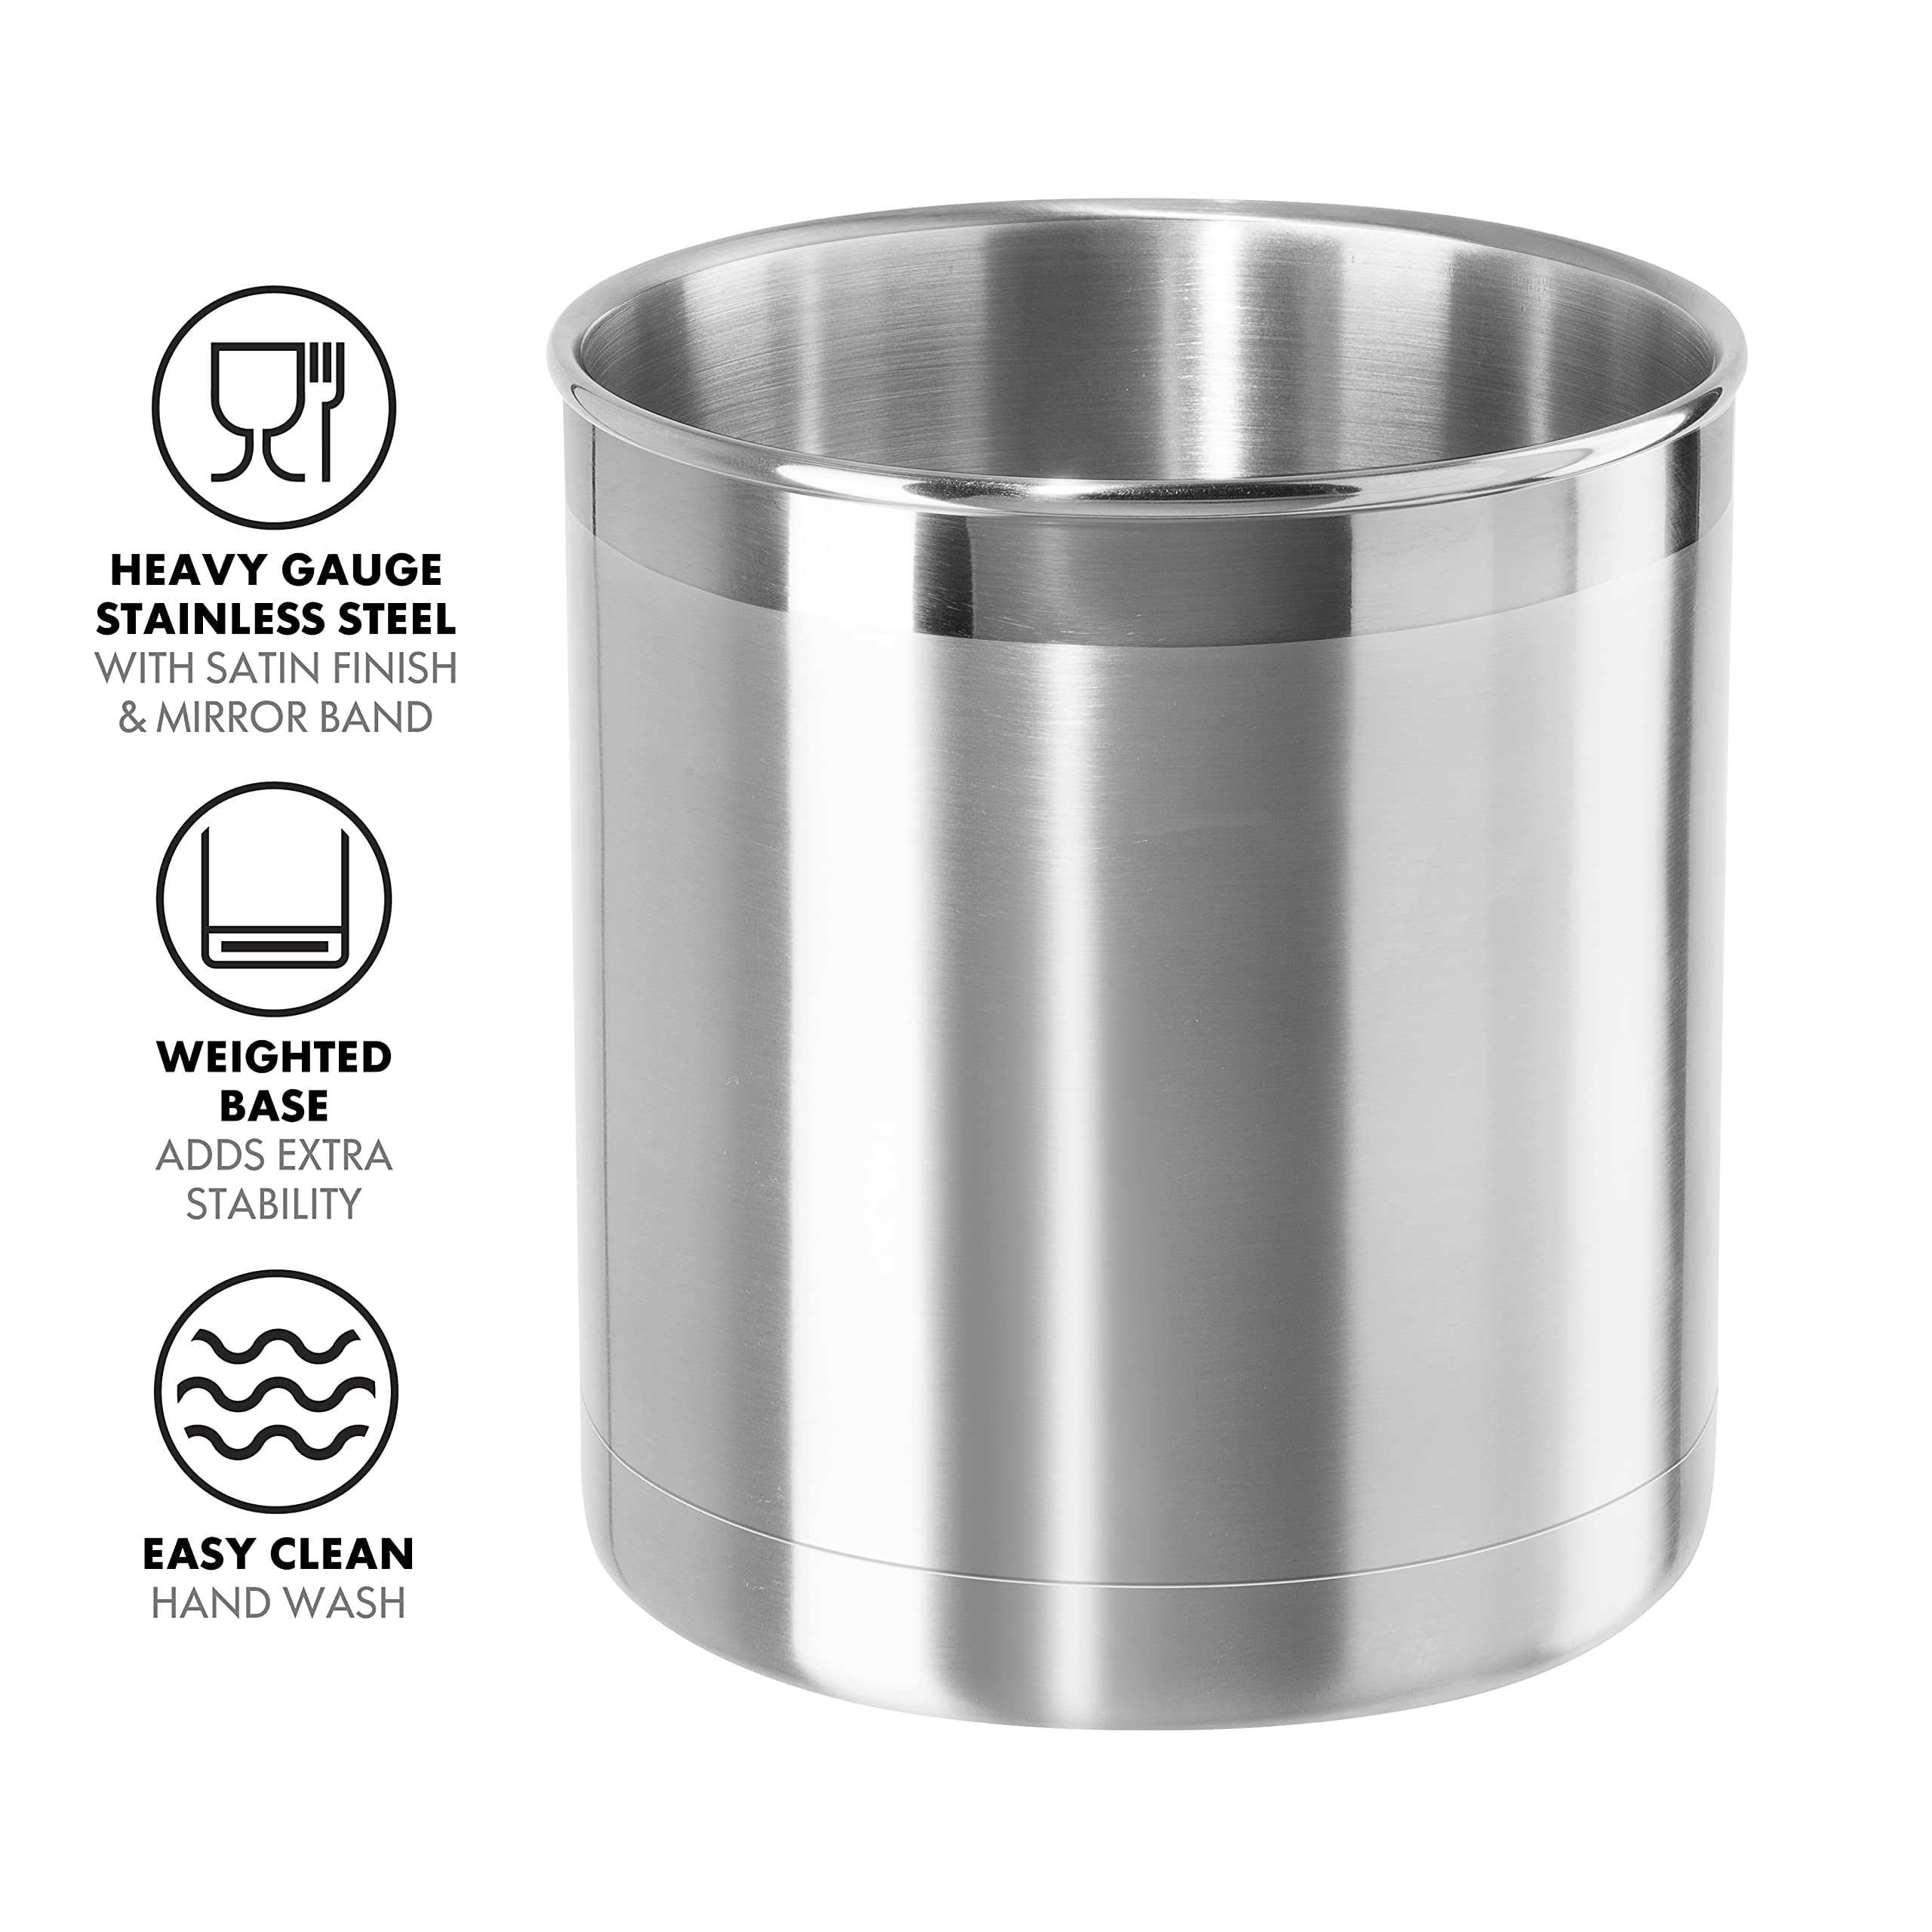 Cook N Home Stainless Steel Utensil Holder Jumbo 2PC Set, 5.5-inch x  6.3-inch and 6.3-inch x 7.08-inch, Silver